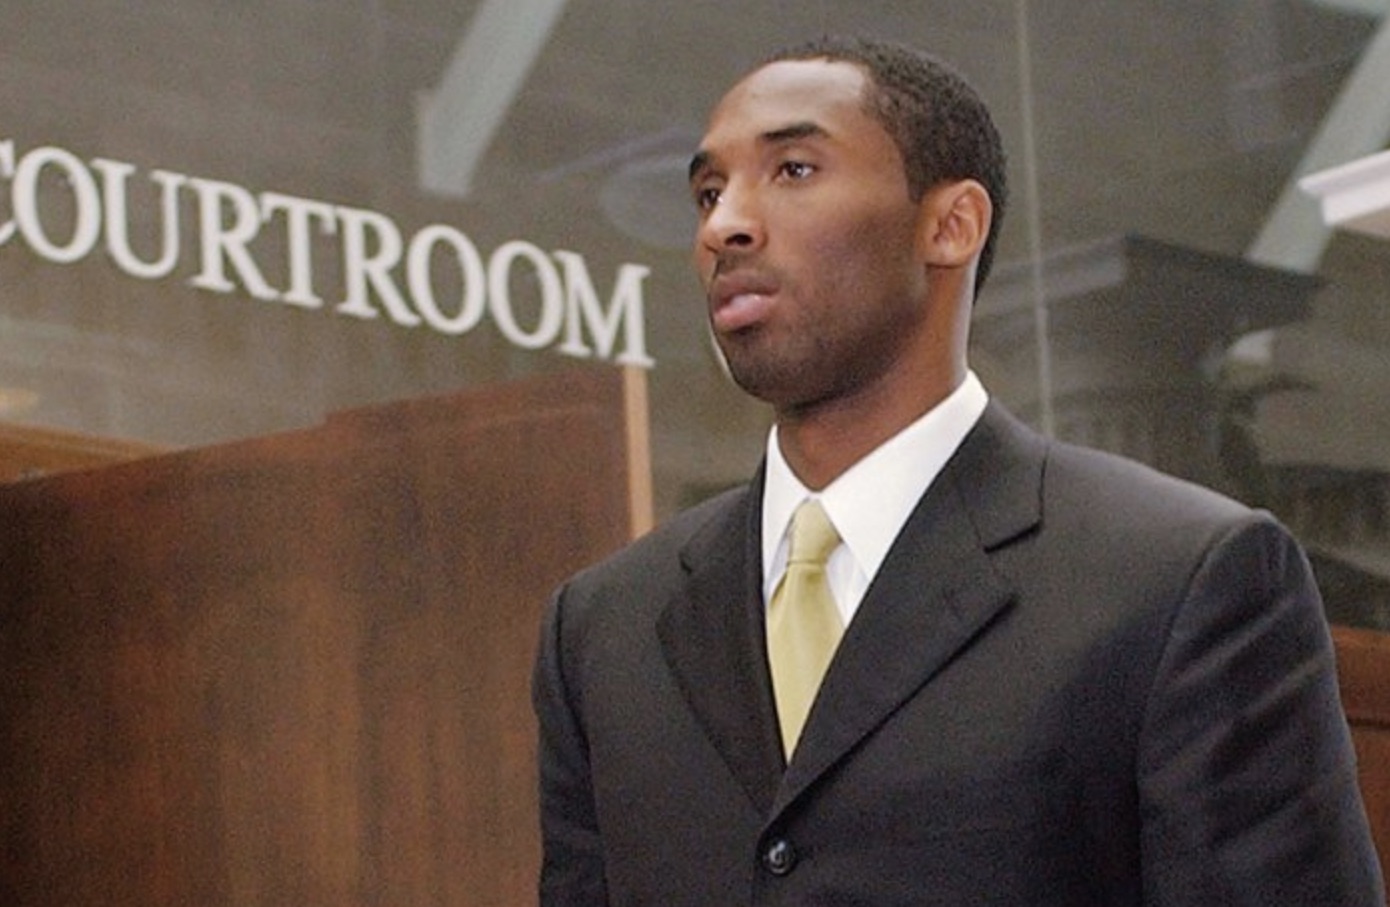 Kobe Bryant confessed to rape. That’s part of his story.